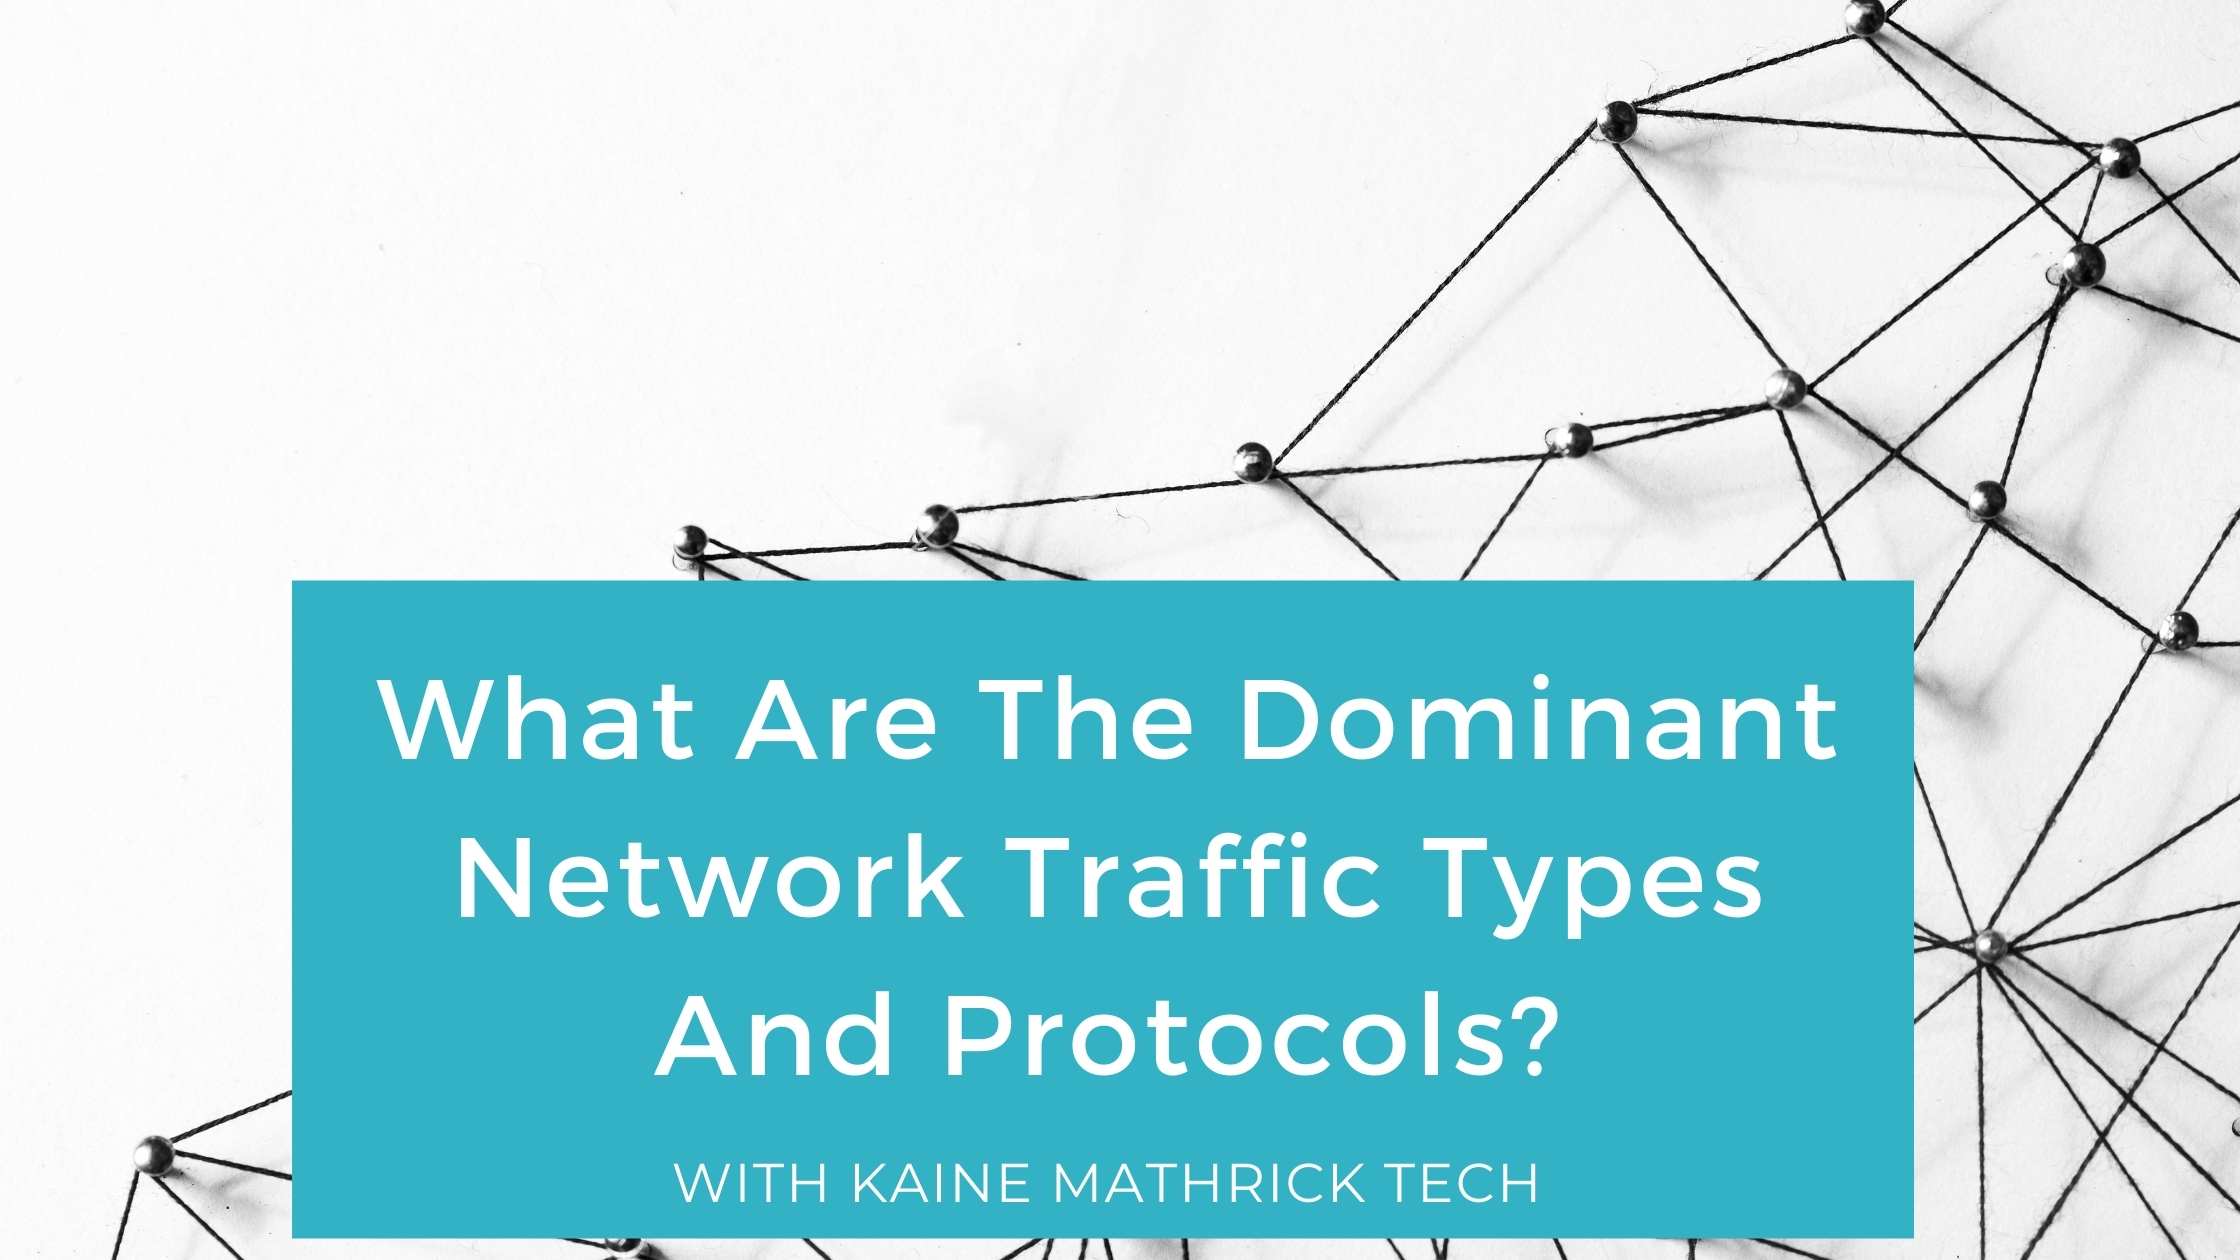 What Are The Dominant Network Traffic Types And Protocols?